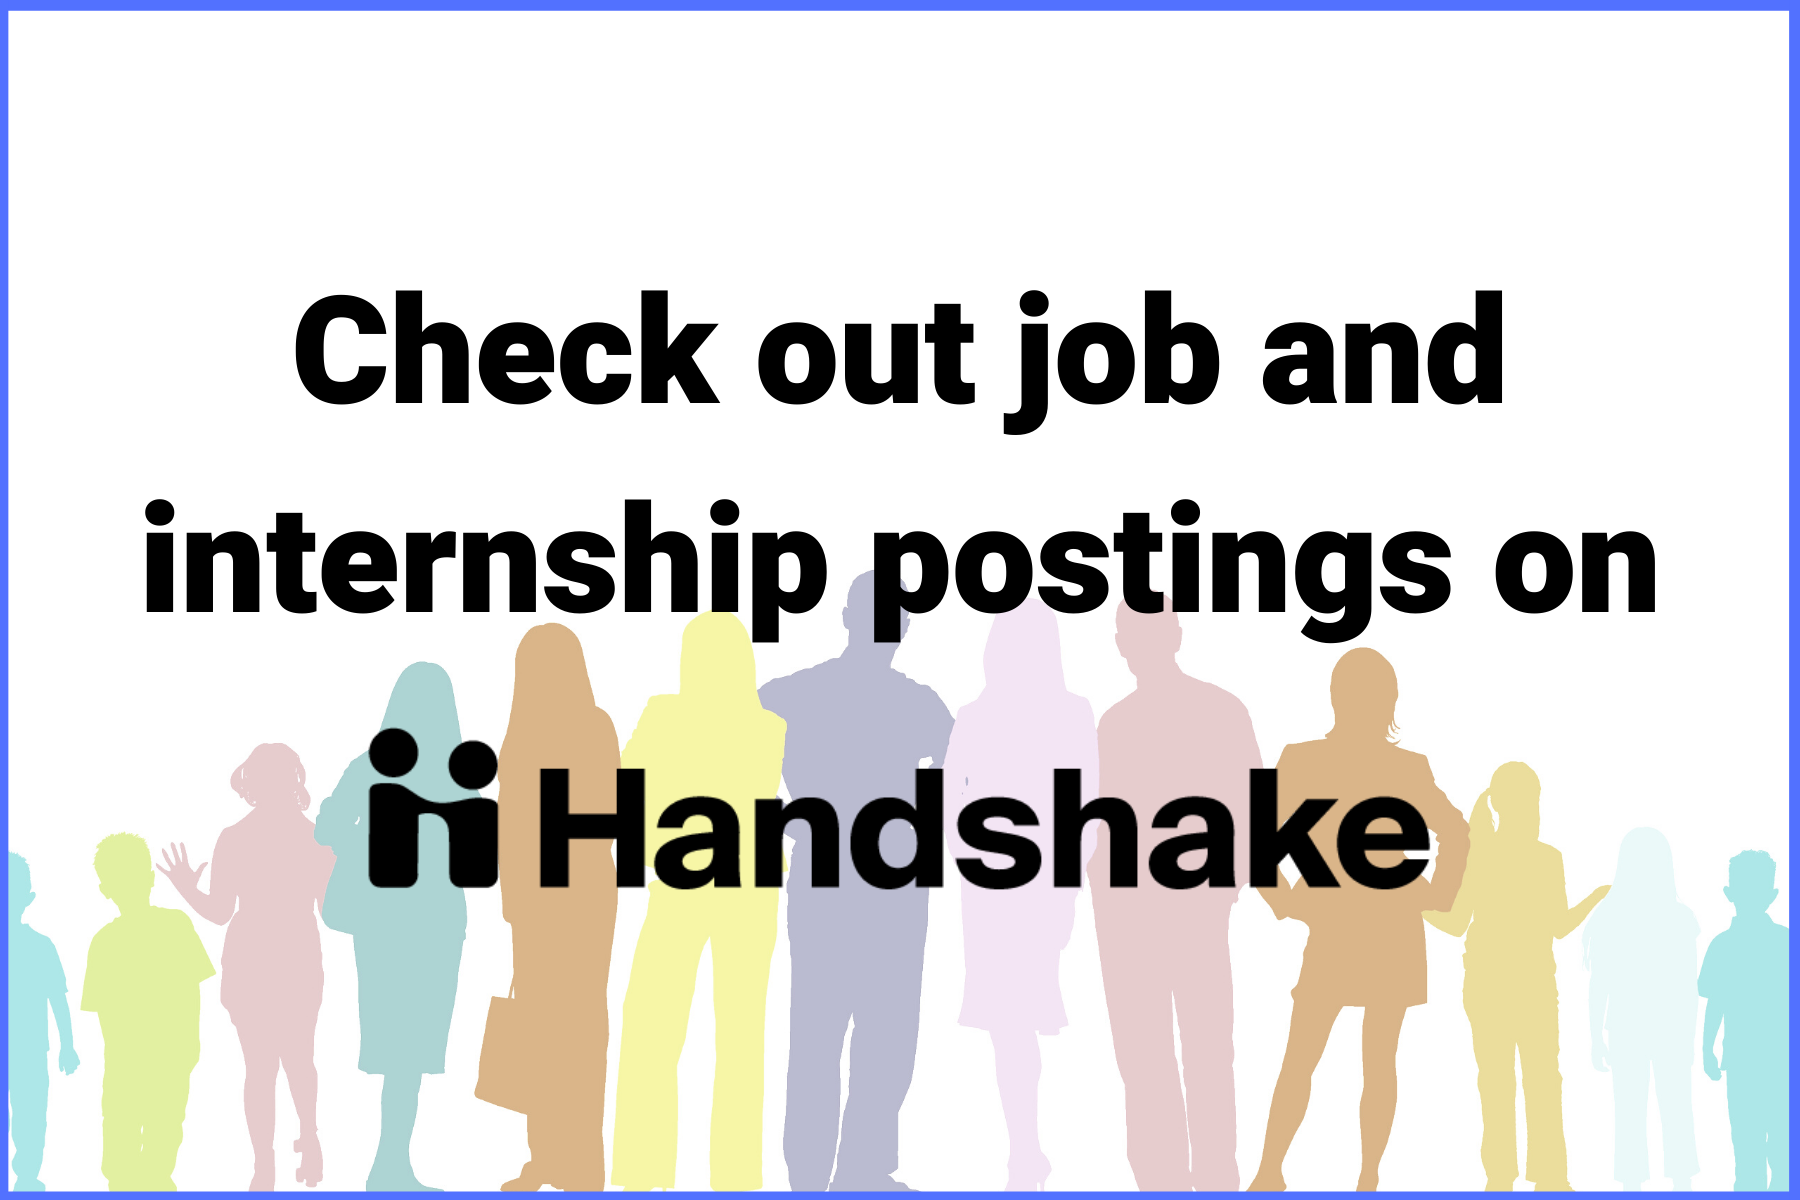 Find opportunities in community development and social service on Handshake